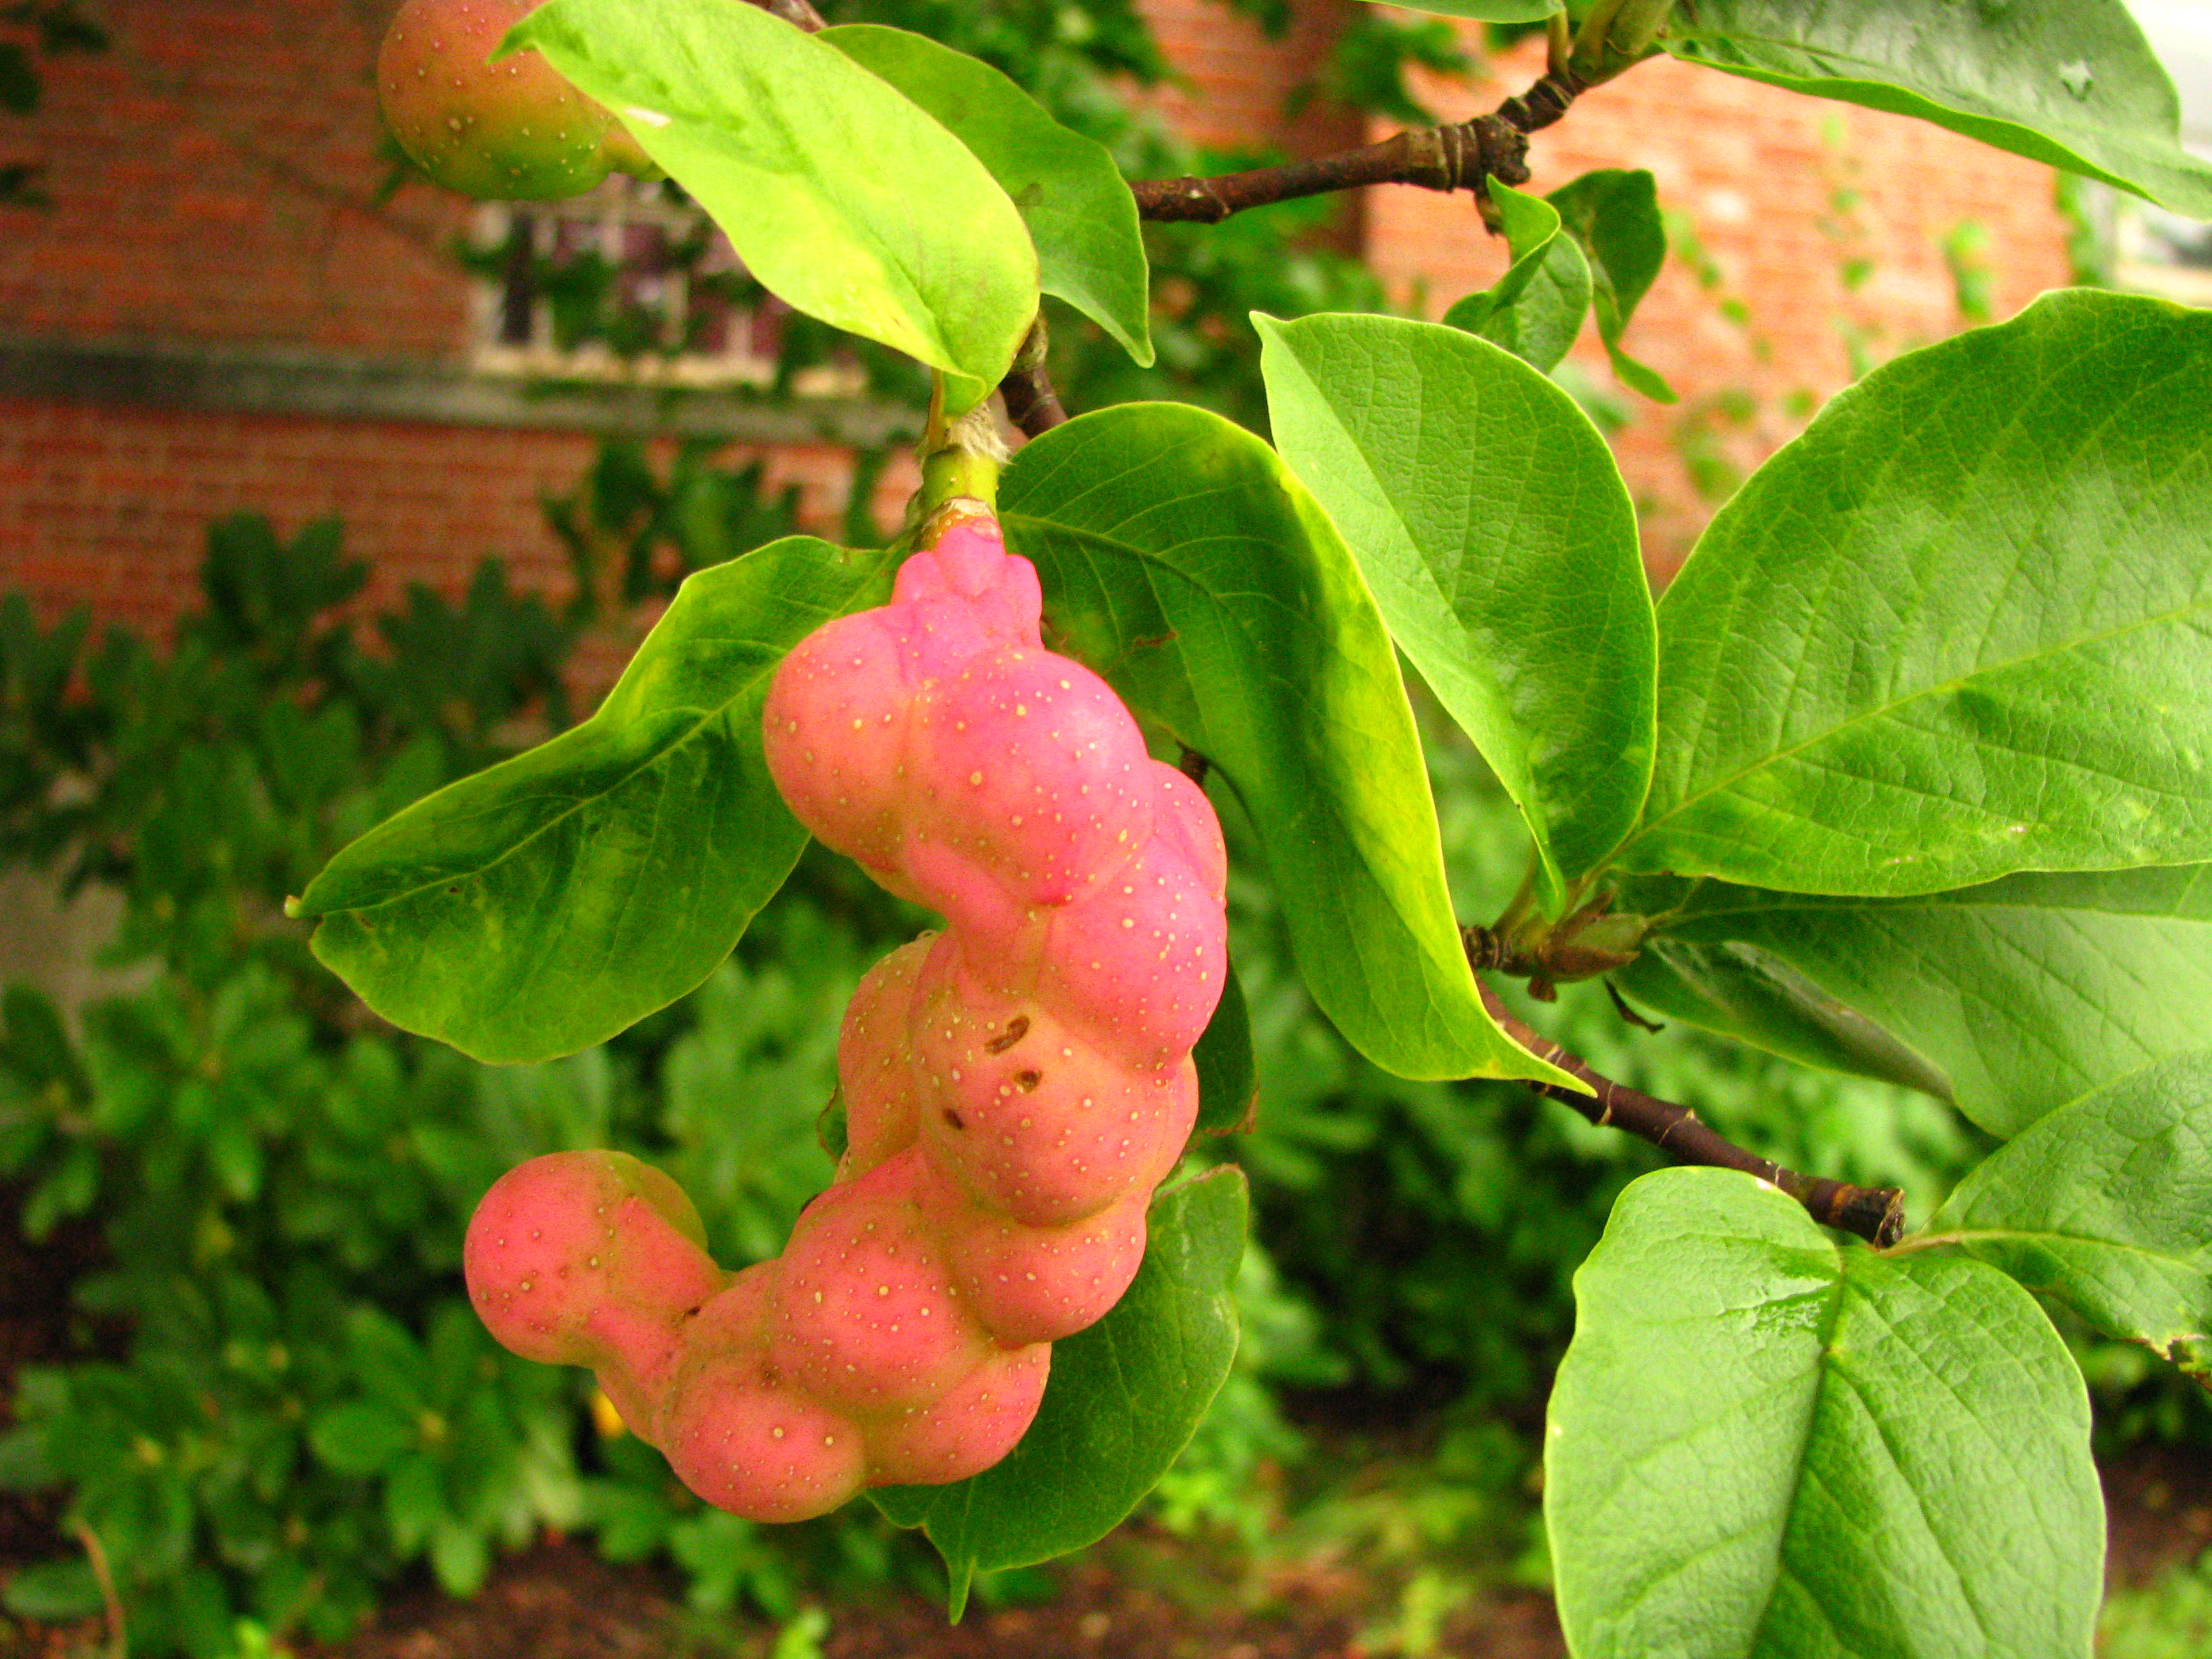 Get a Look at Late Summer Tree Fruits | Uconnladybug's Blog